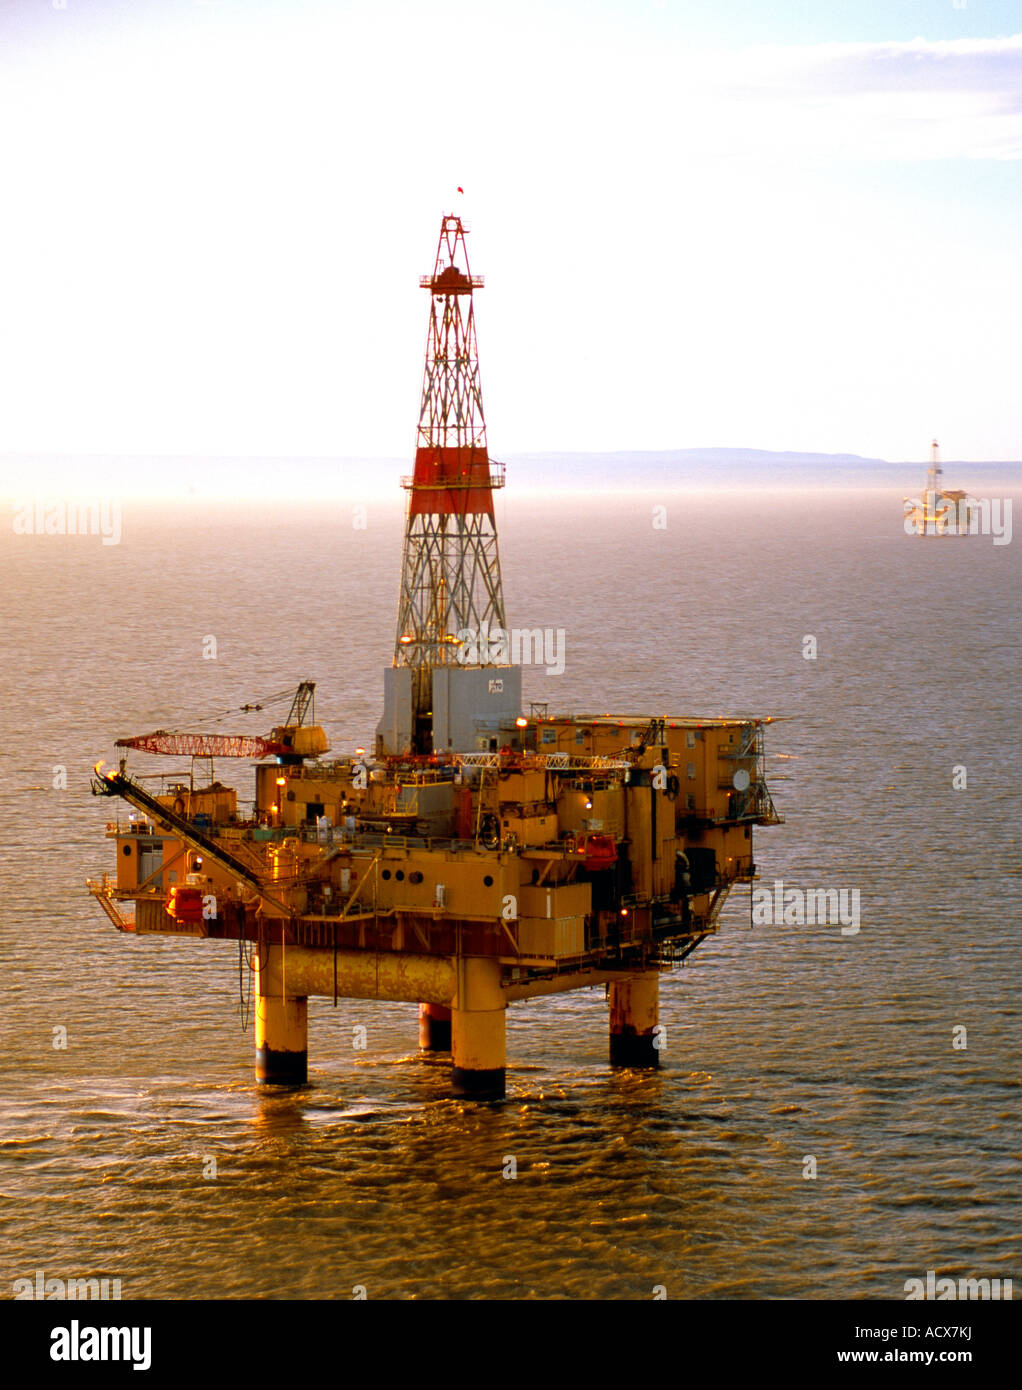 The C offshore oil rig in the Cook Inlet Alaska The oil rig is operated by XTO Energy Stock Photo